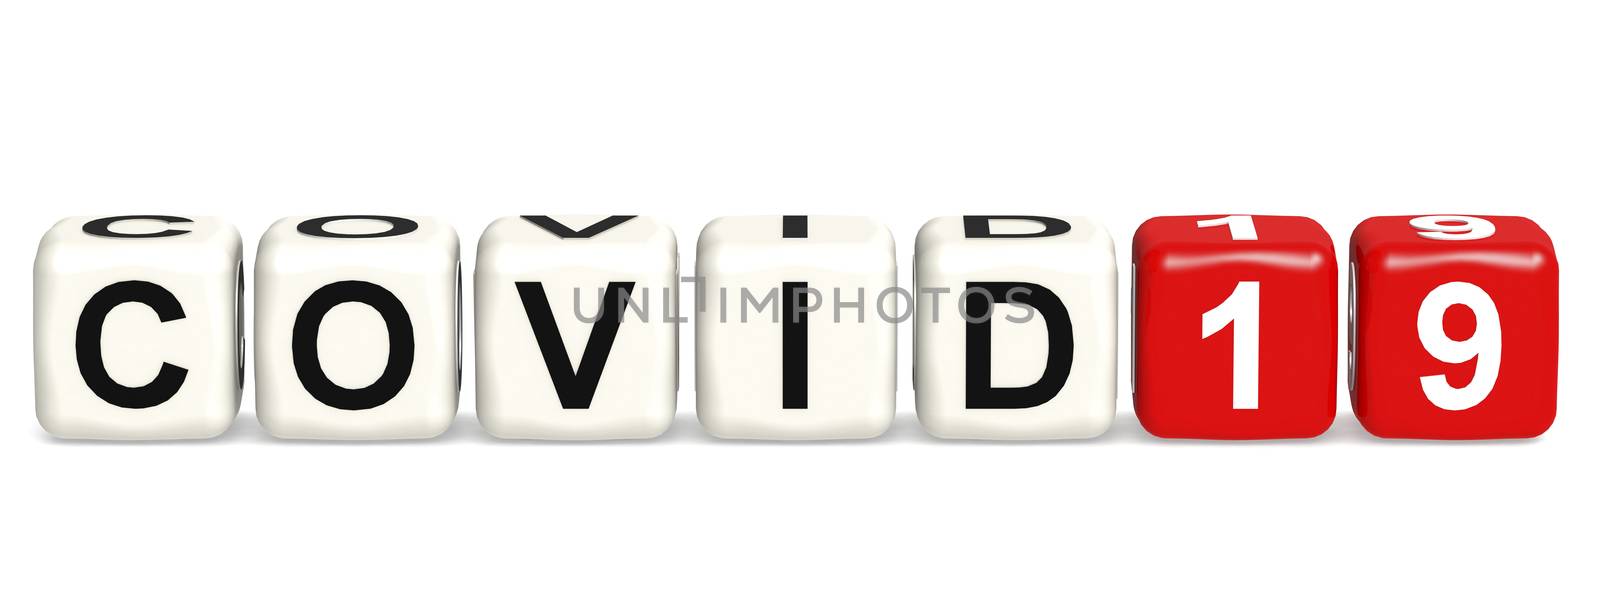 Covid19 word concept on cube block isolated by tang90246